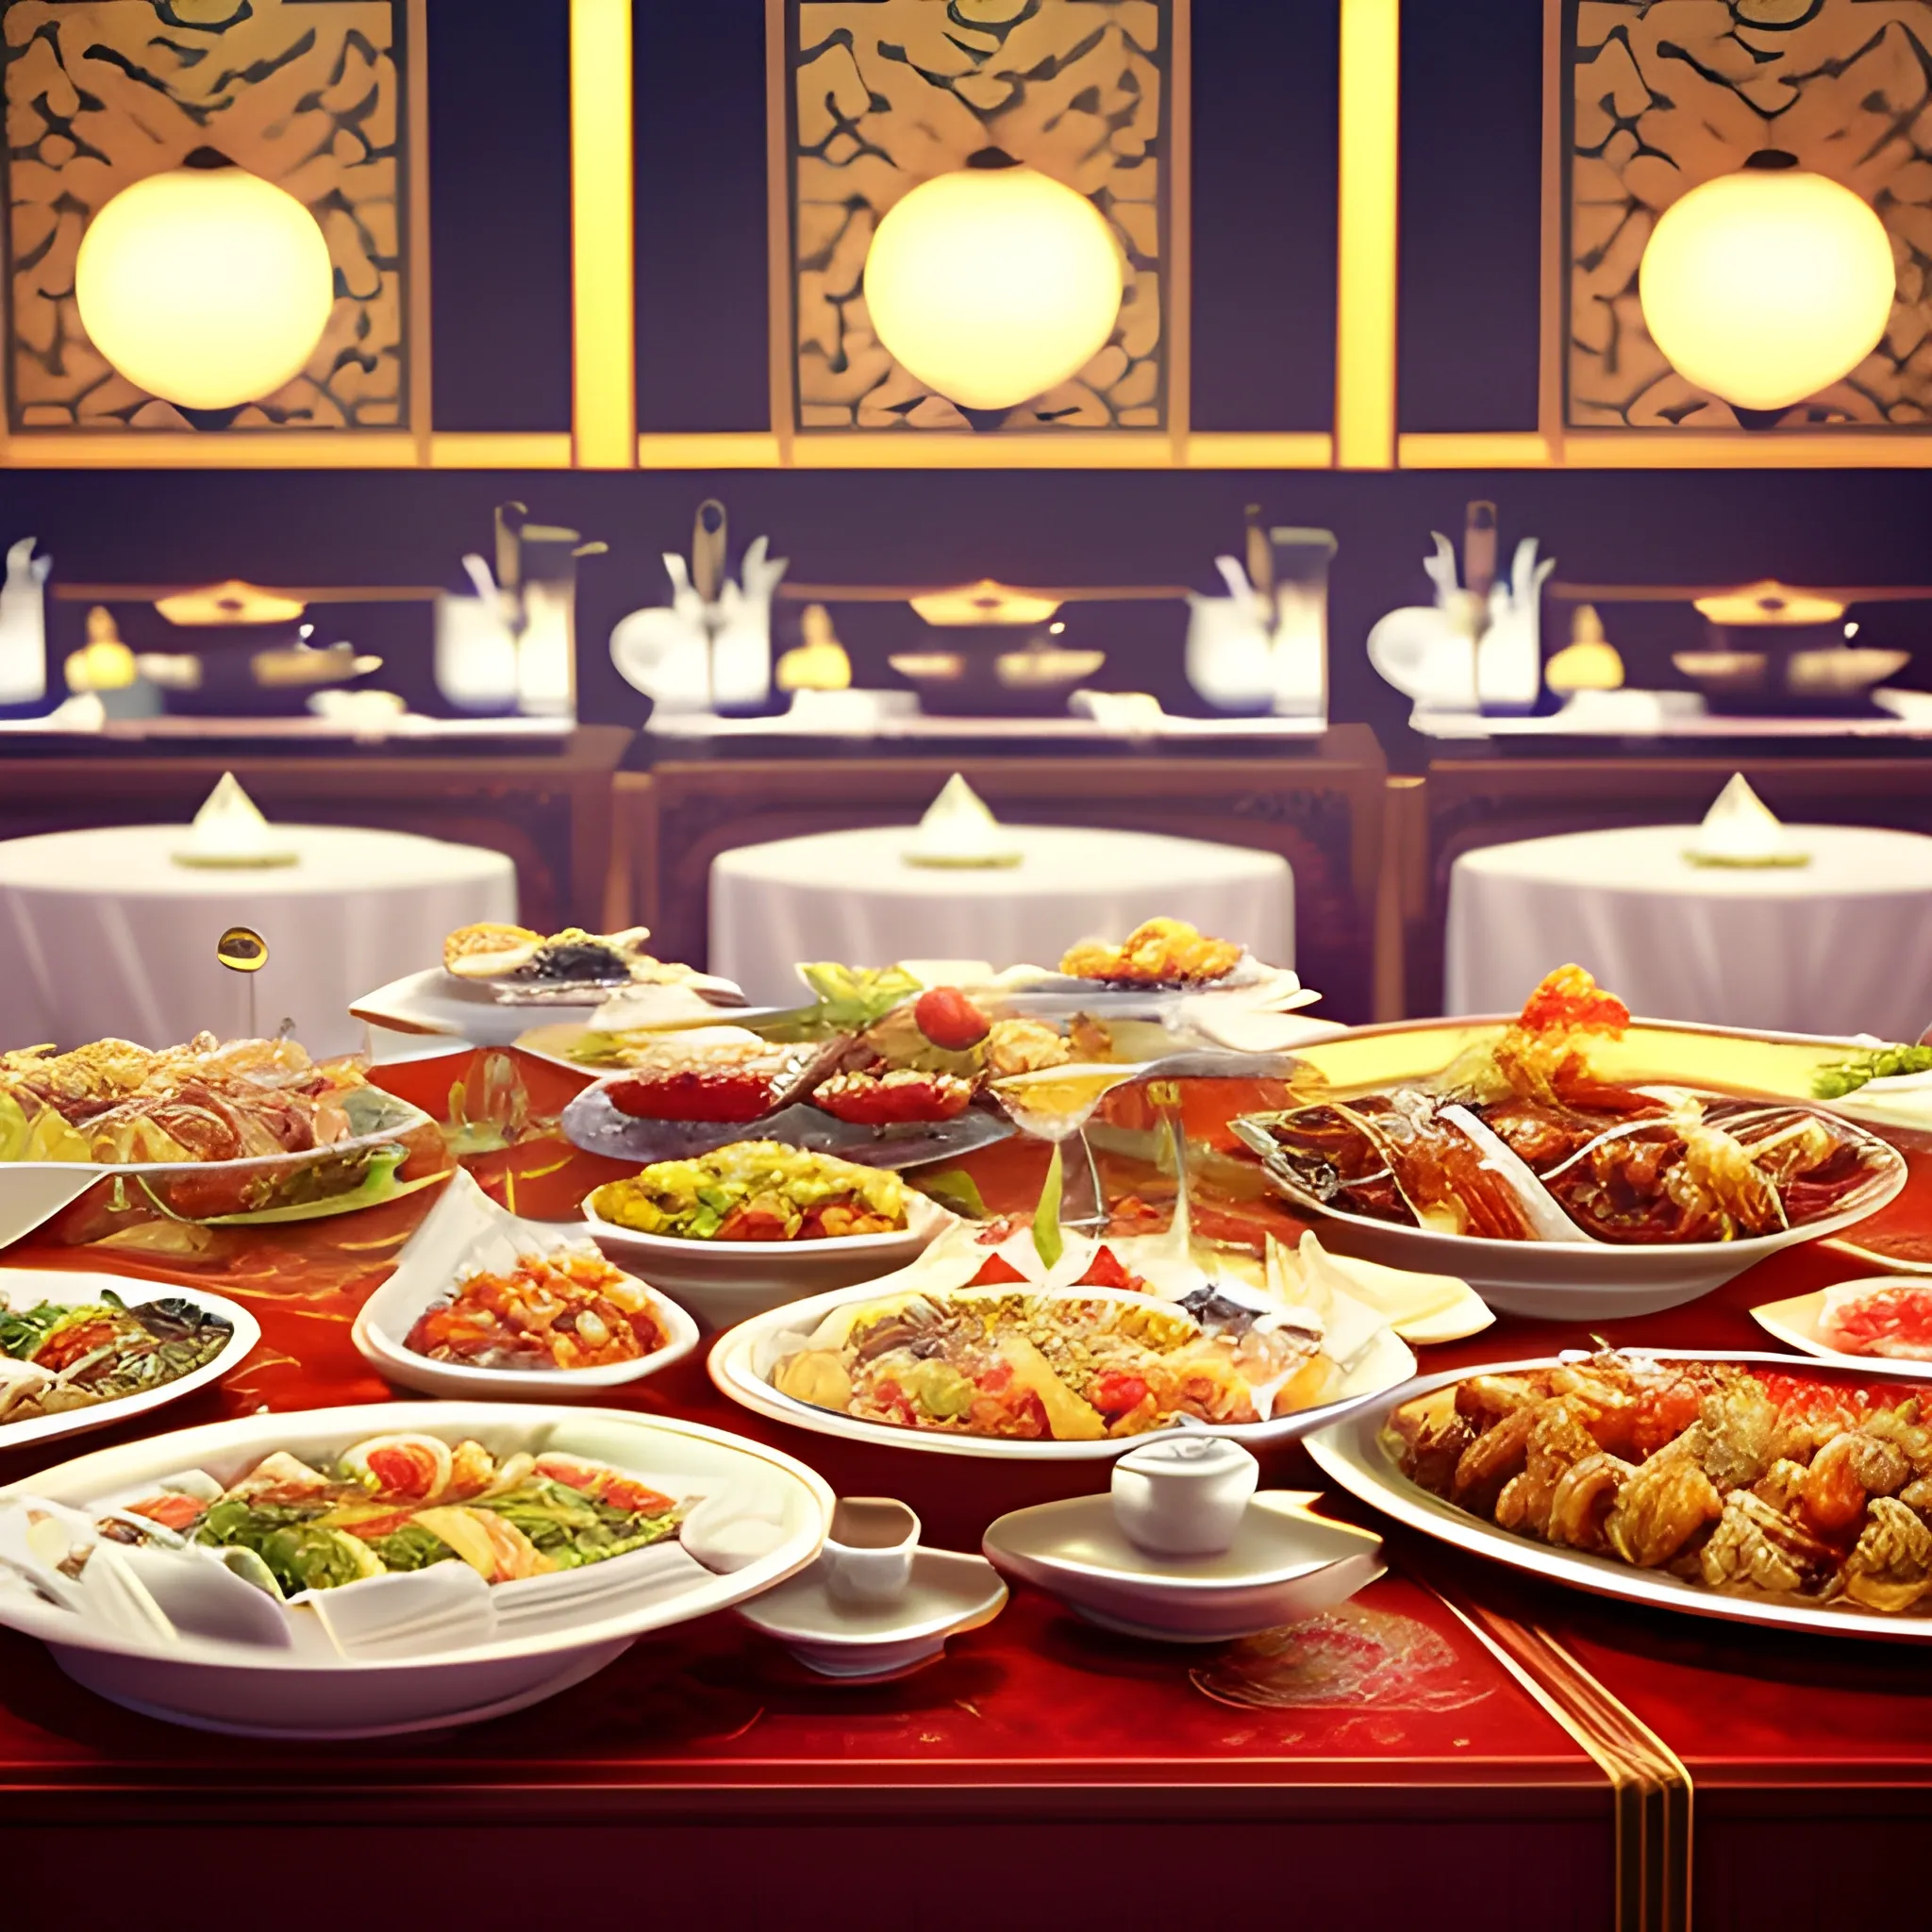 cinematic, 6 star hotel, close up of buffet serving table set up with all kinds of Chinese cuisine, epic realism, cinematic, epic realism,8K, highly detailed, long shot technique, dreamy vibe, Cartoon